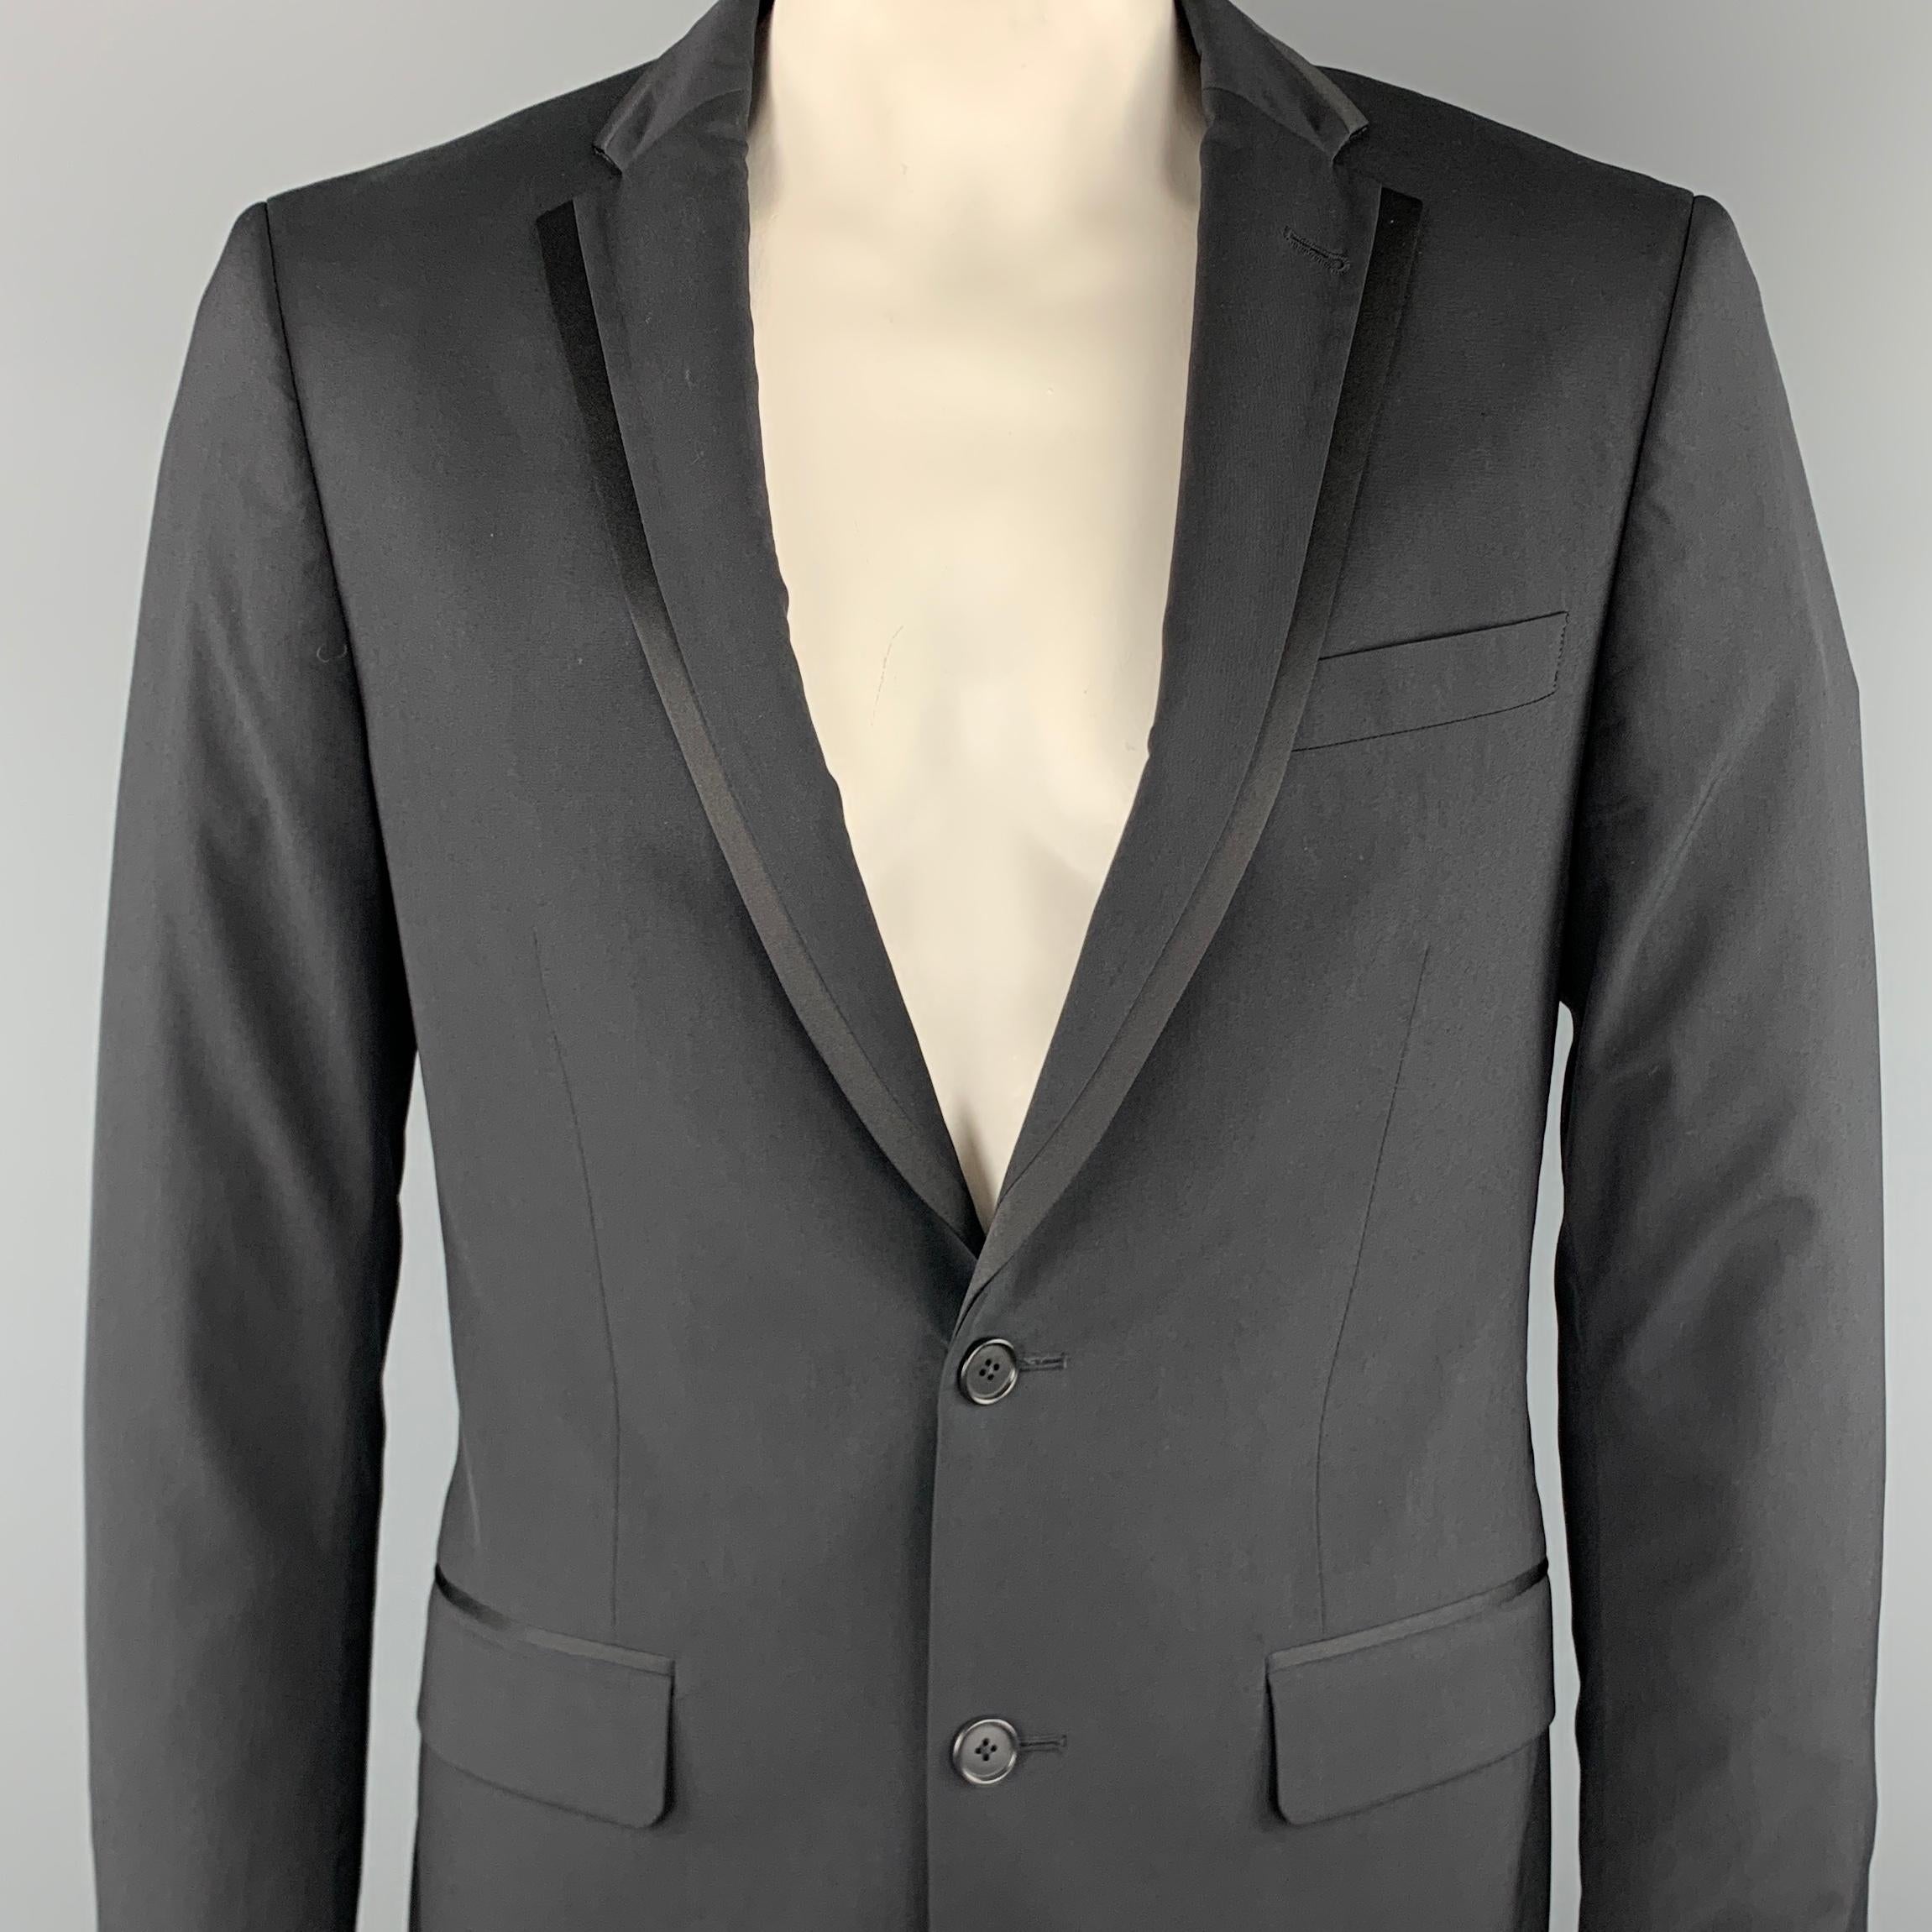 JOHN VARVATOS * U.S.A sport coat comes in a black wool featuring a notch lapel, flap pockets, and a two button closure.

Excellent Pre-Owned Condition.
Marked: 40

Measurements:

Shoulder: 18 in. 
Chest: 40 in. 
Sleeve: 26 in. 
Length: 30 in. 